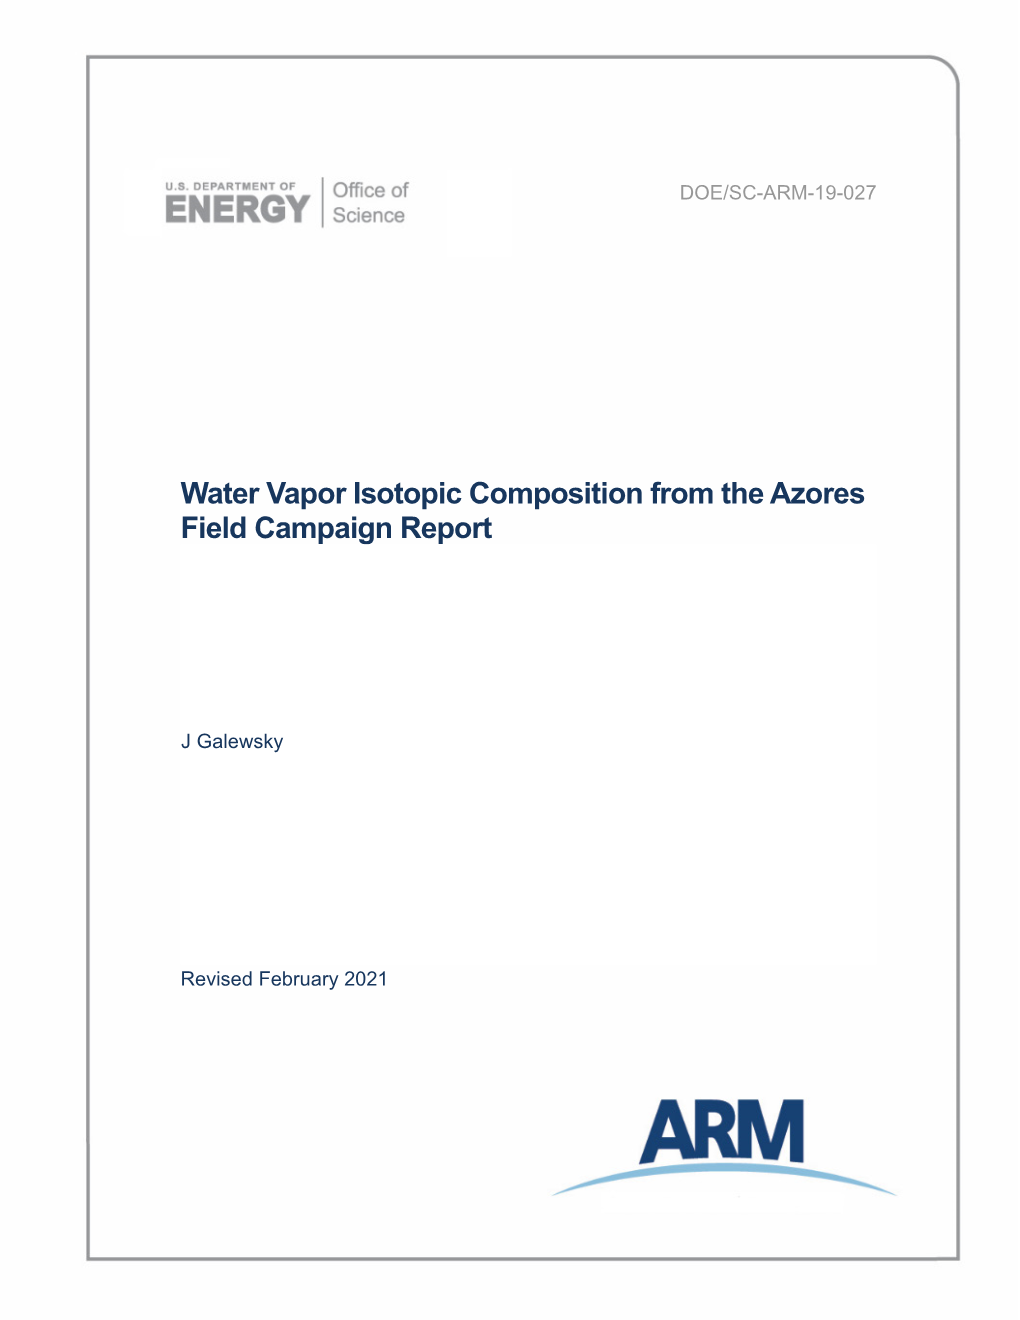 Water Vapor Isotopic Composition from the Azores Field Campaign Report